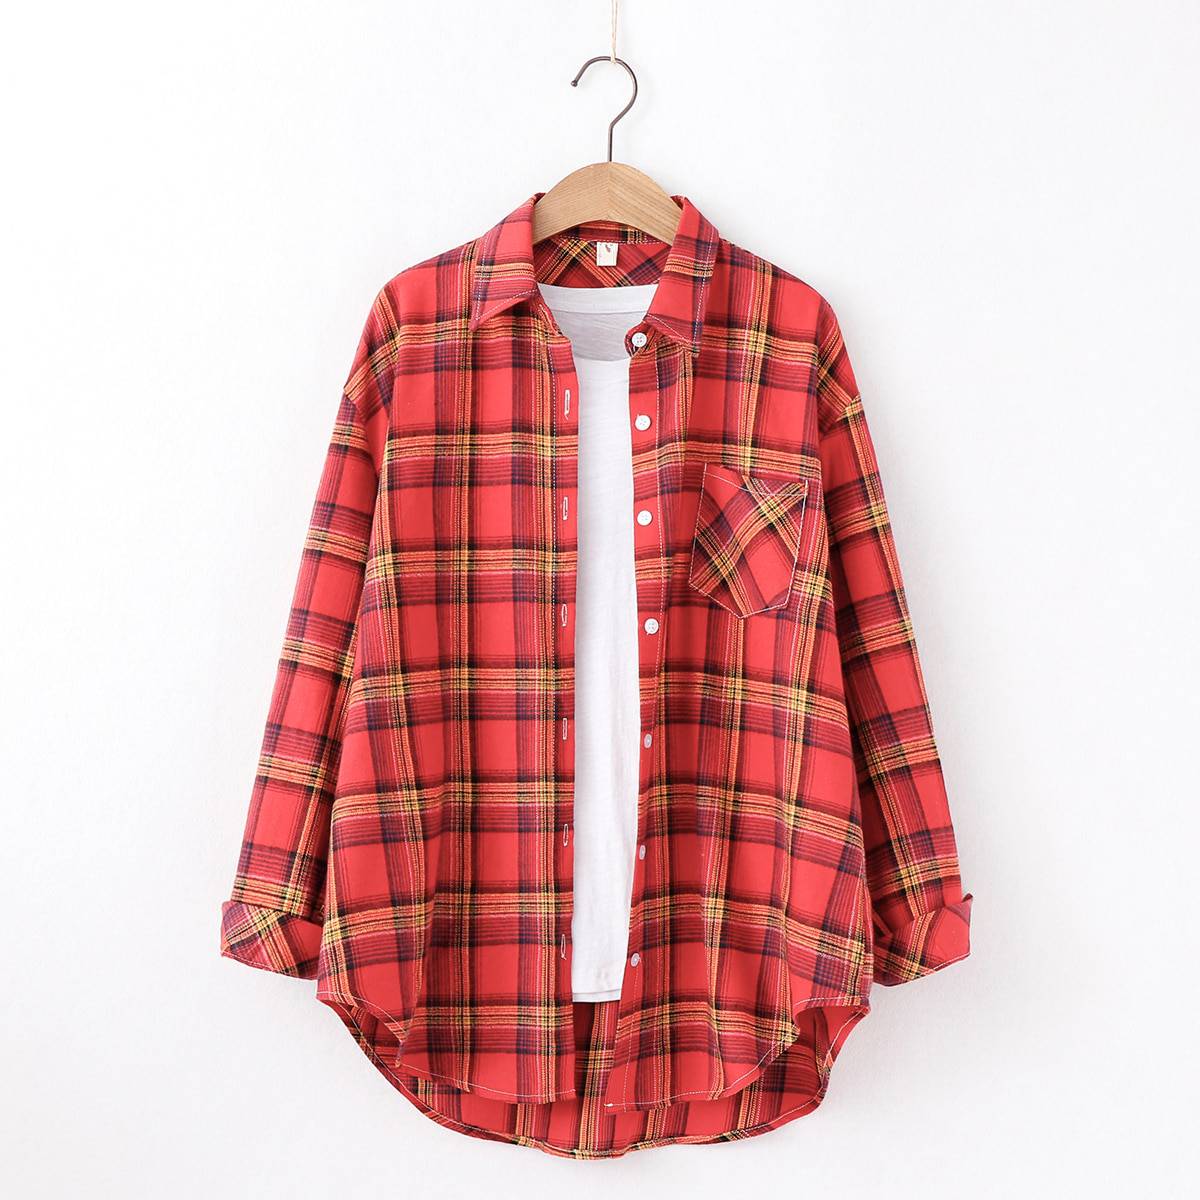 FREE SHIPPING Vintage Plaid Shirt Long Sleeve OUT0789